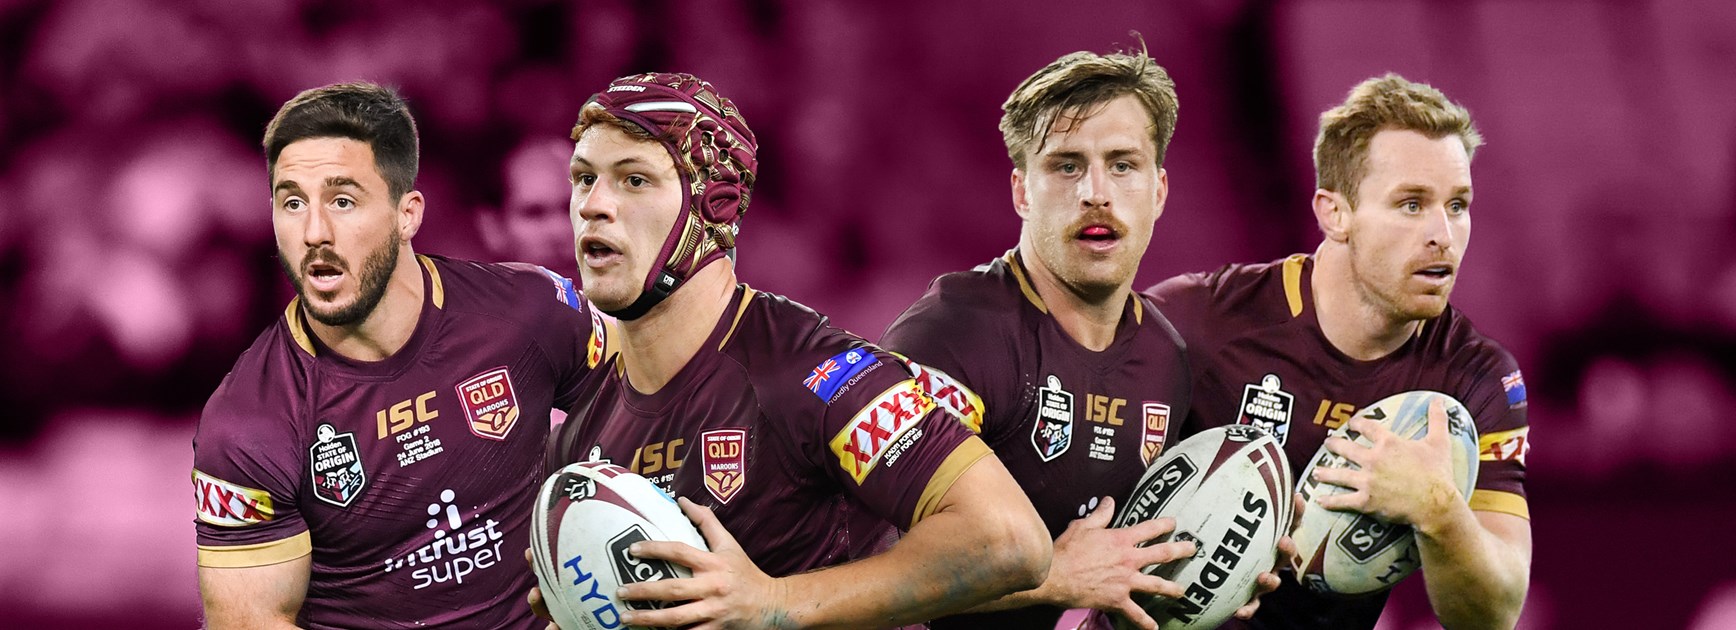 Ranking the Maroons spine candidates for 2019 Origin